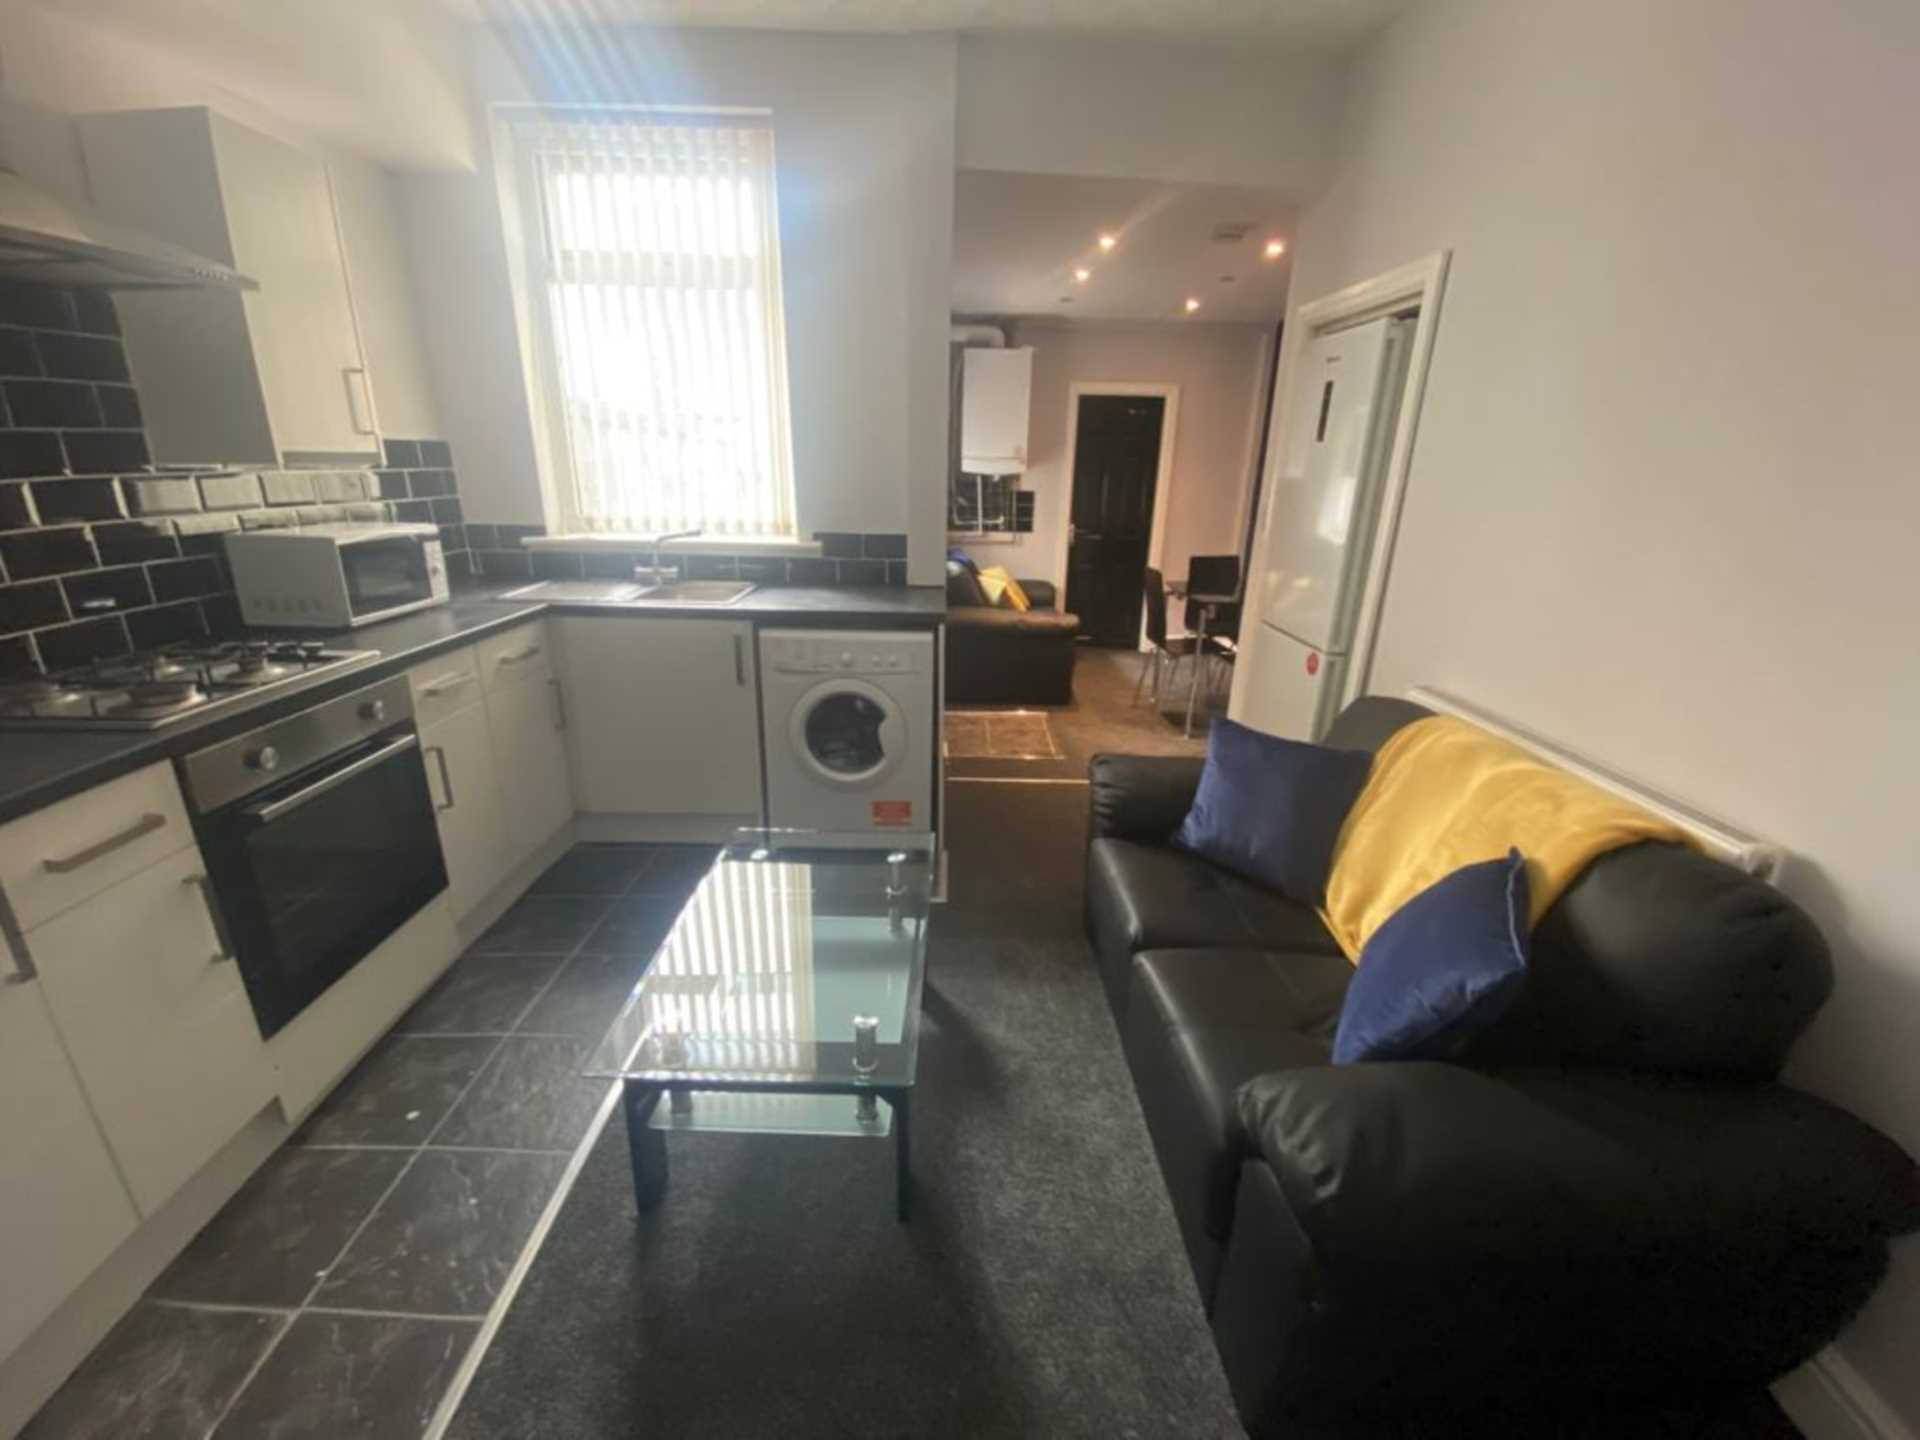 5 bed Room for rent in Liverpool. From Student Haus